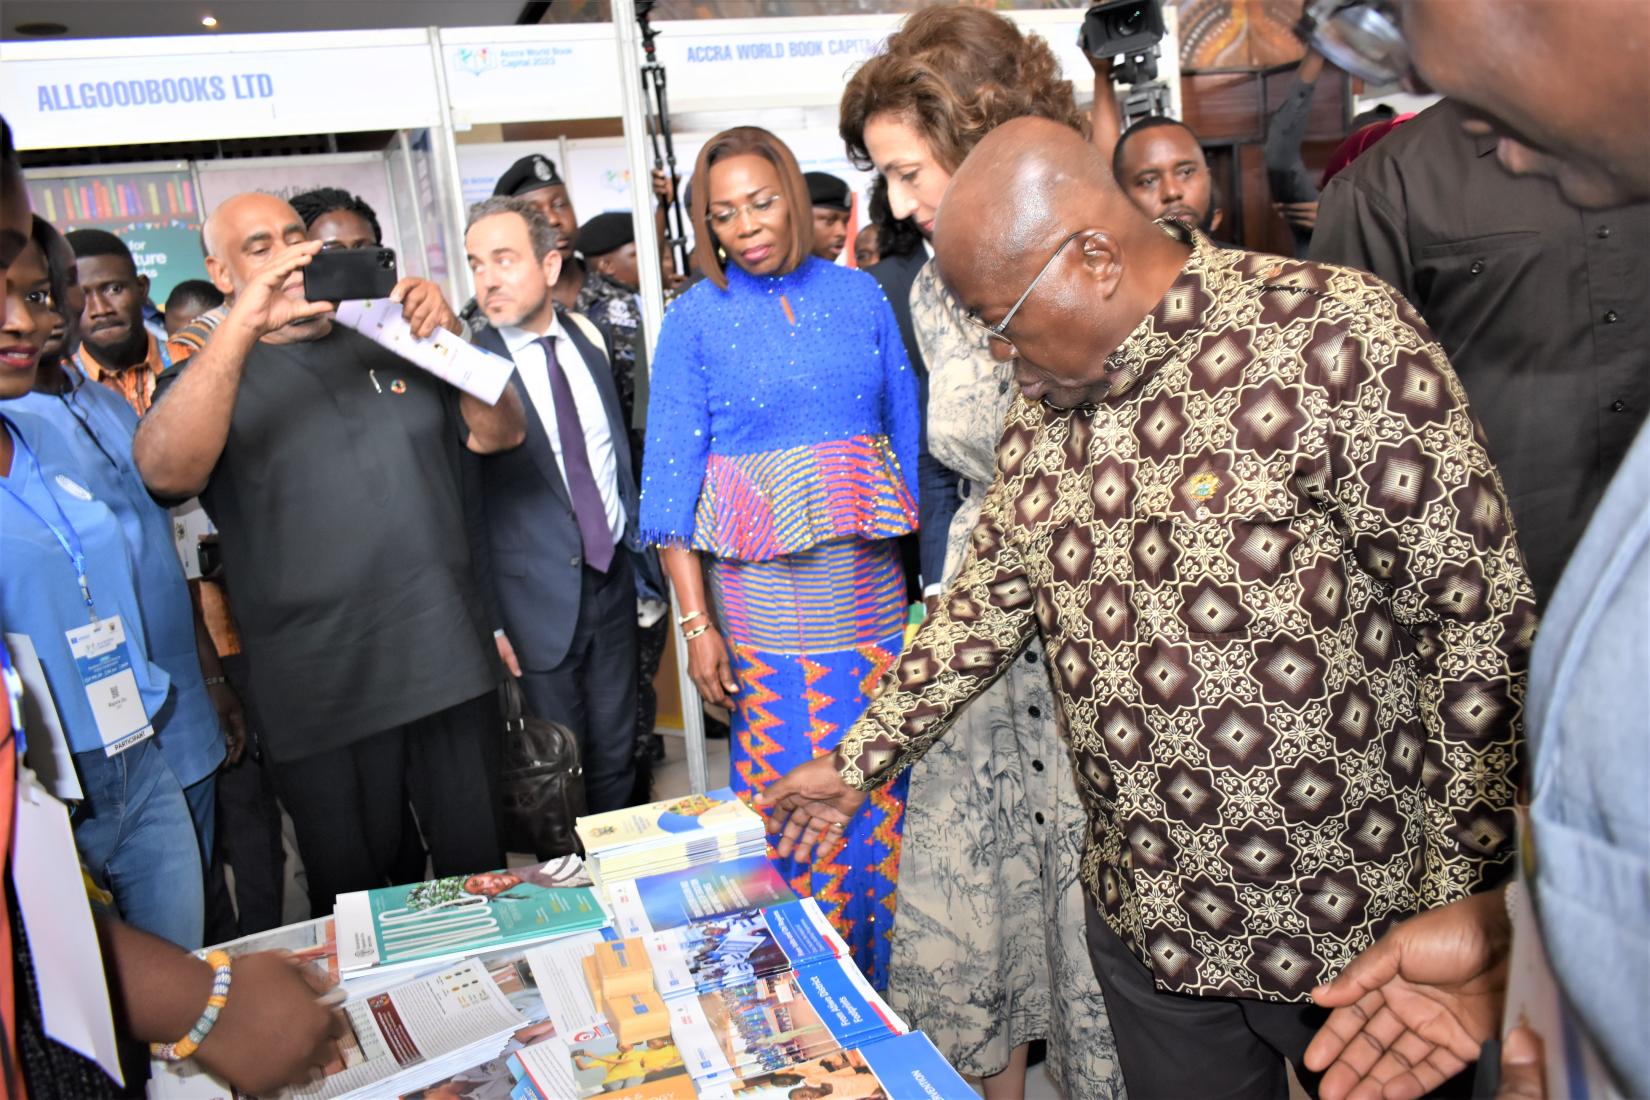 President Akuffo-Addo at the UN Ghana exhibition stand.